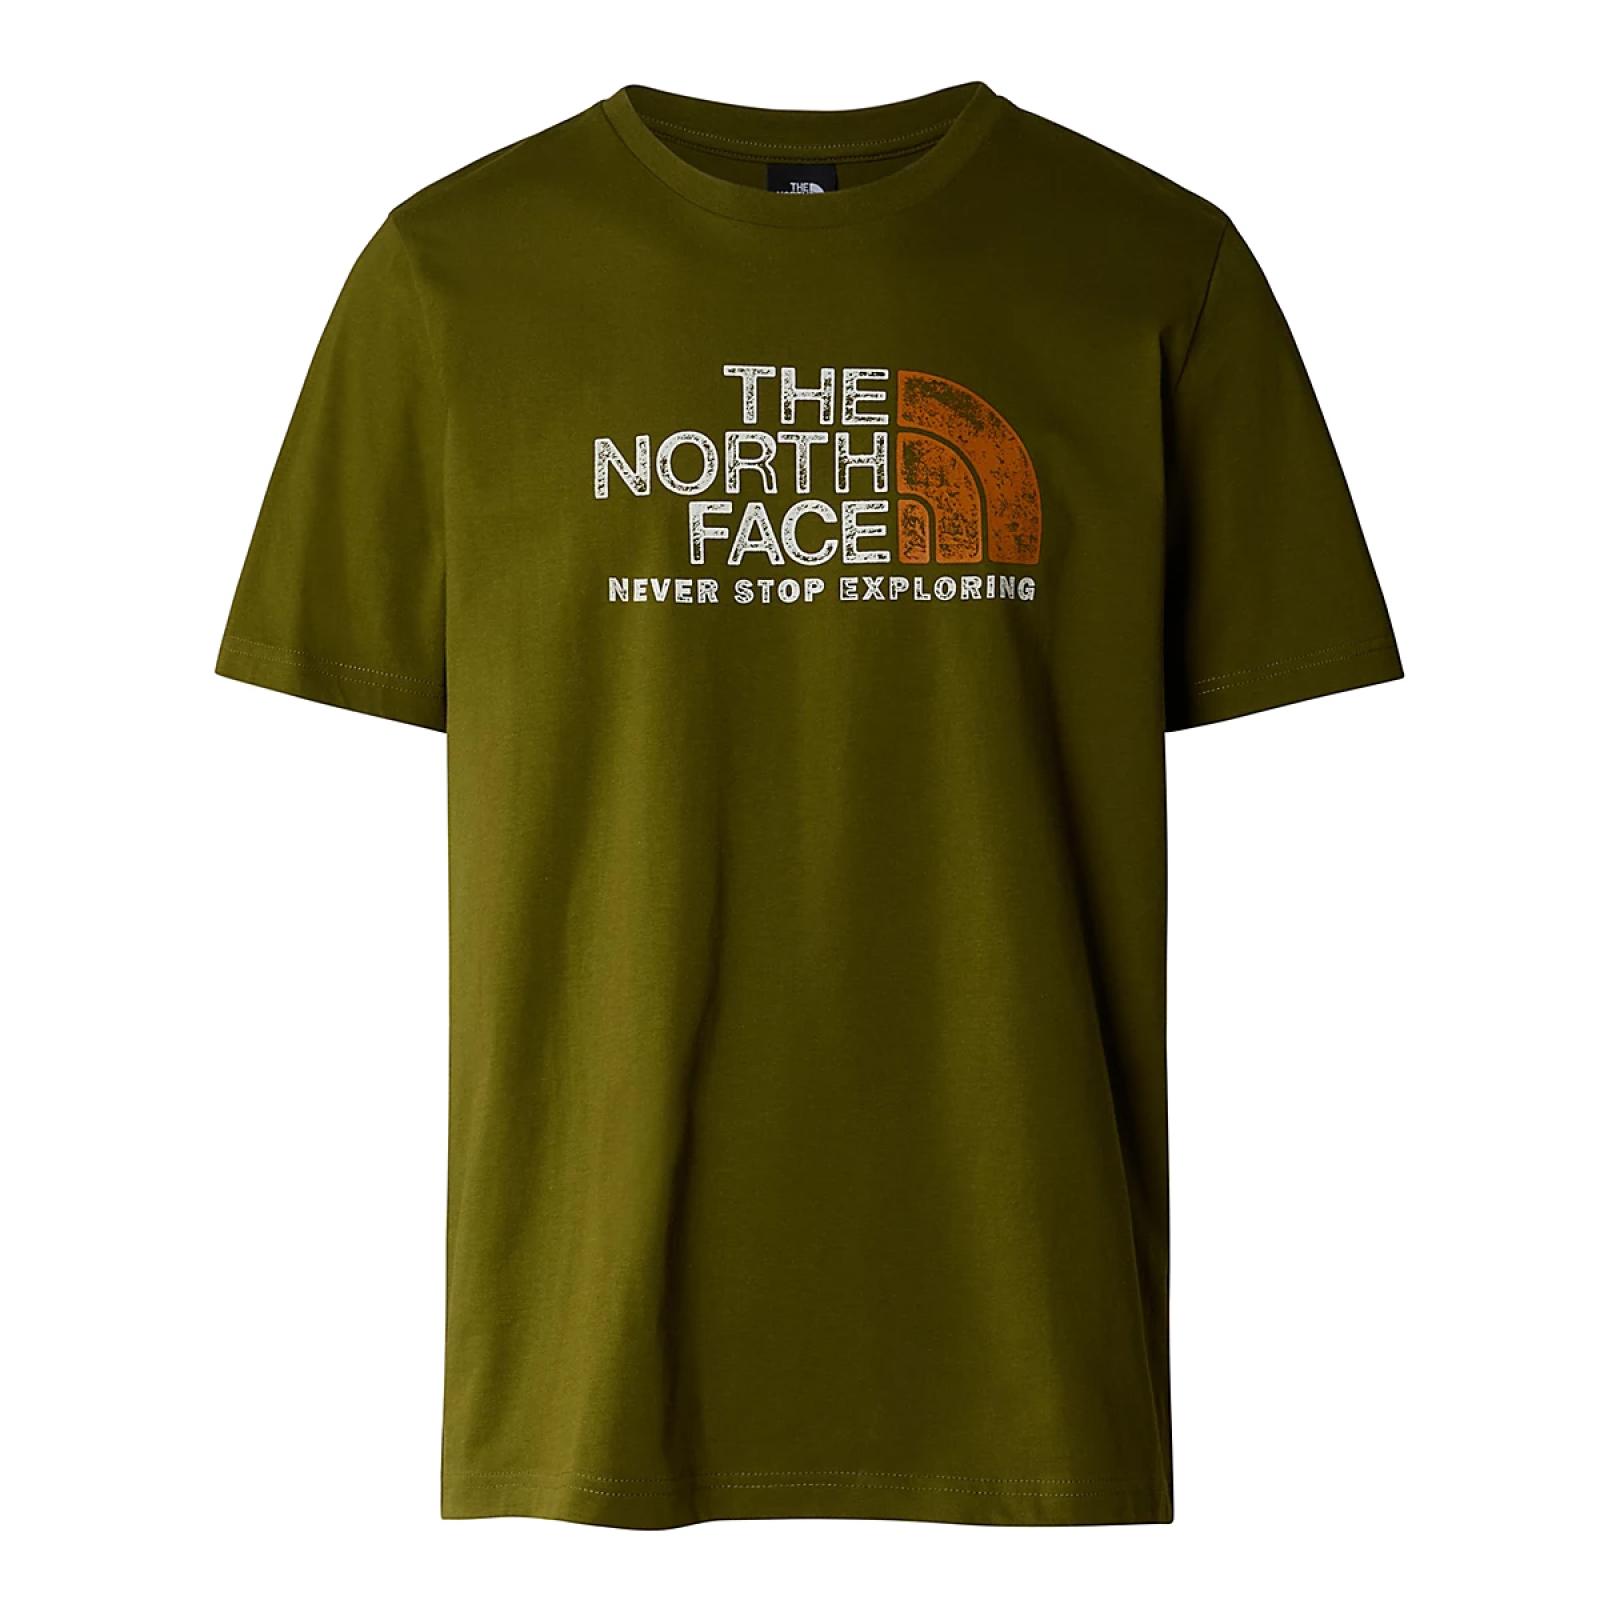 The North Face T-Shirt Rust 2 Forest Olive - 1